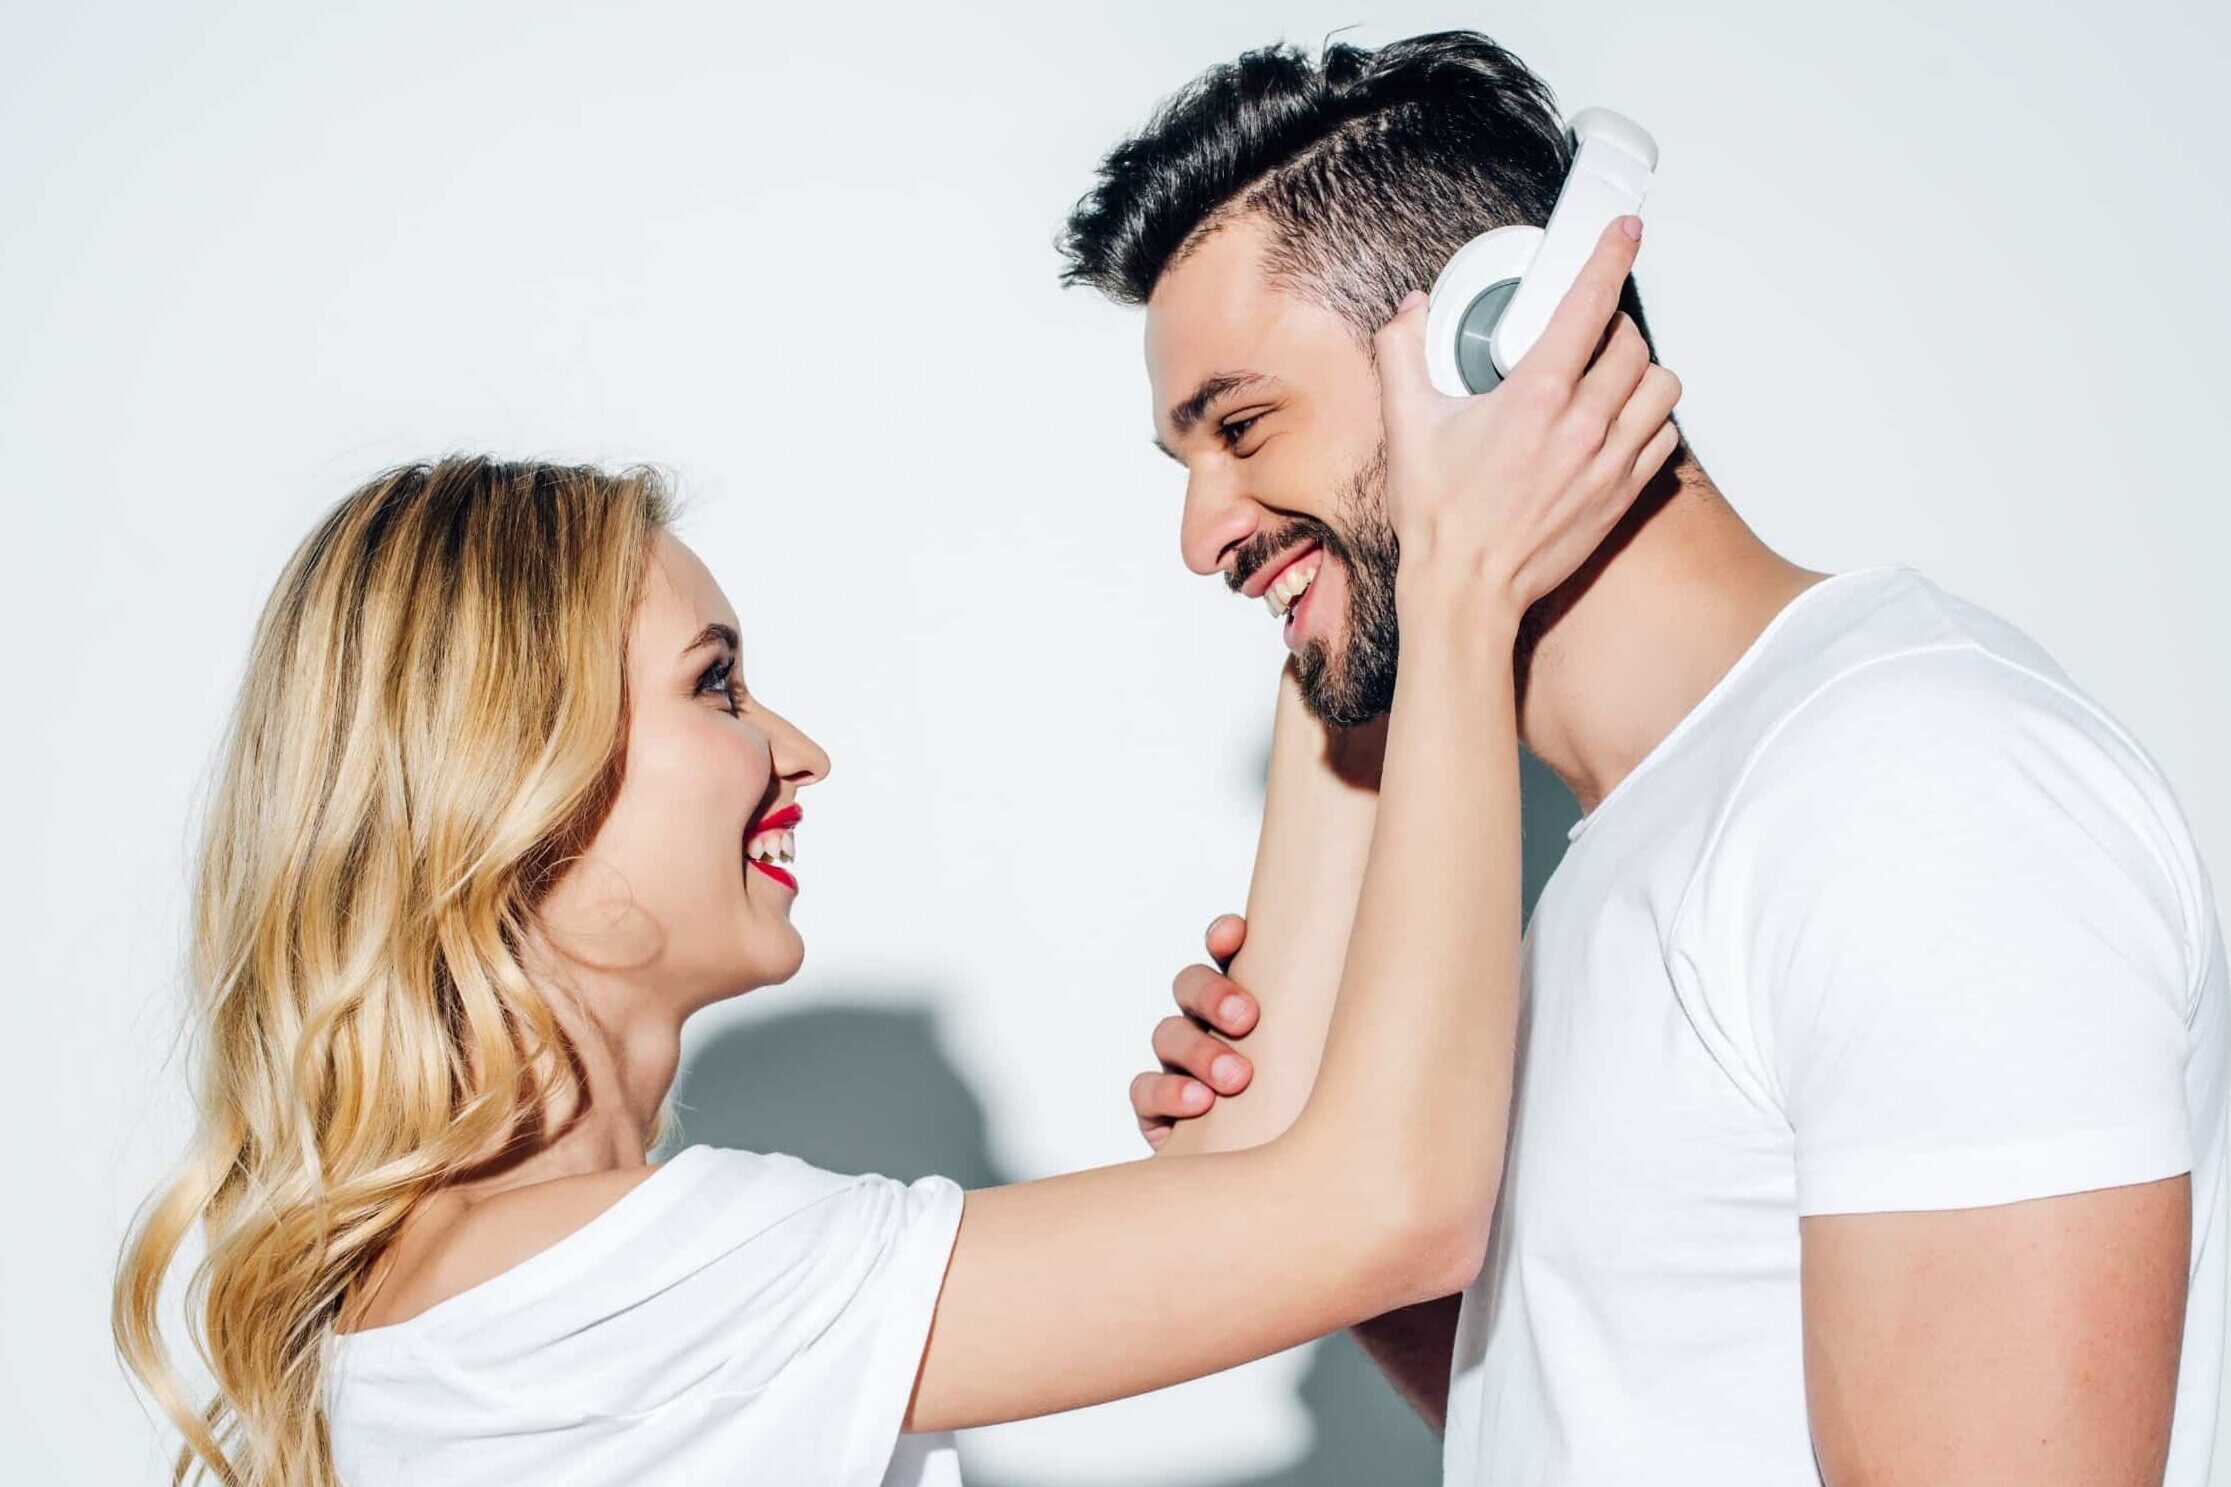 Enjoy sharing music with the best Spotify playlists. | The Dating Divas